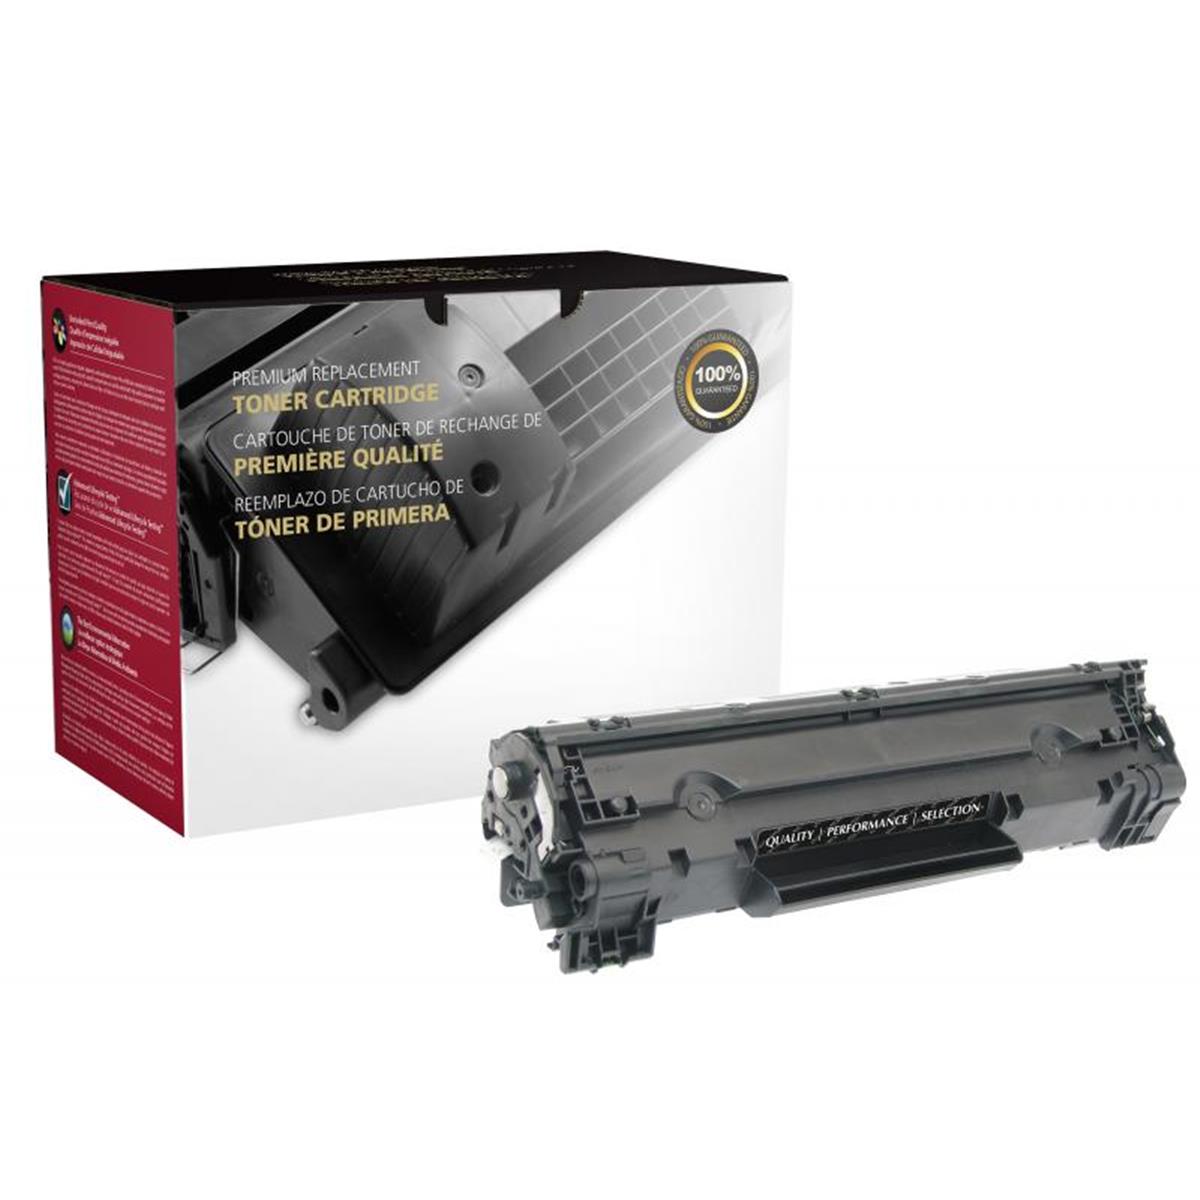 Picture of Canon 200801 Toner Cartridge for Canon 9435B001AA-137